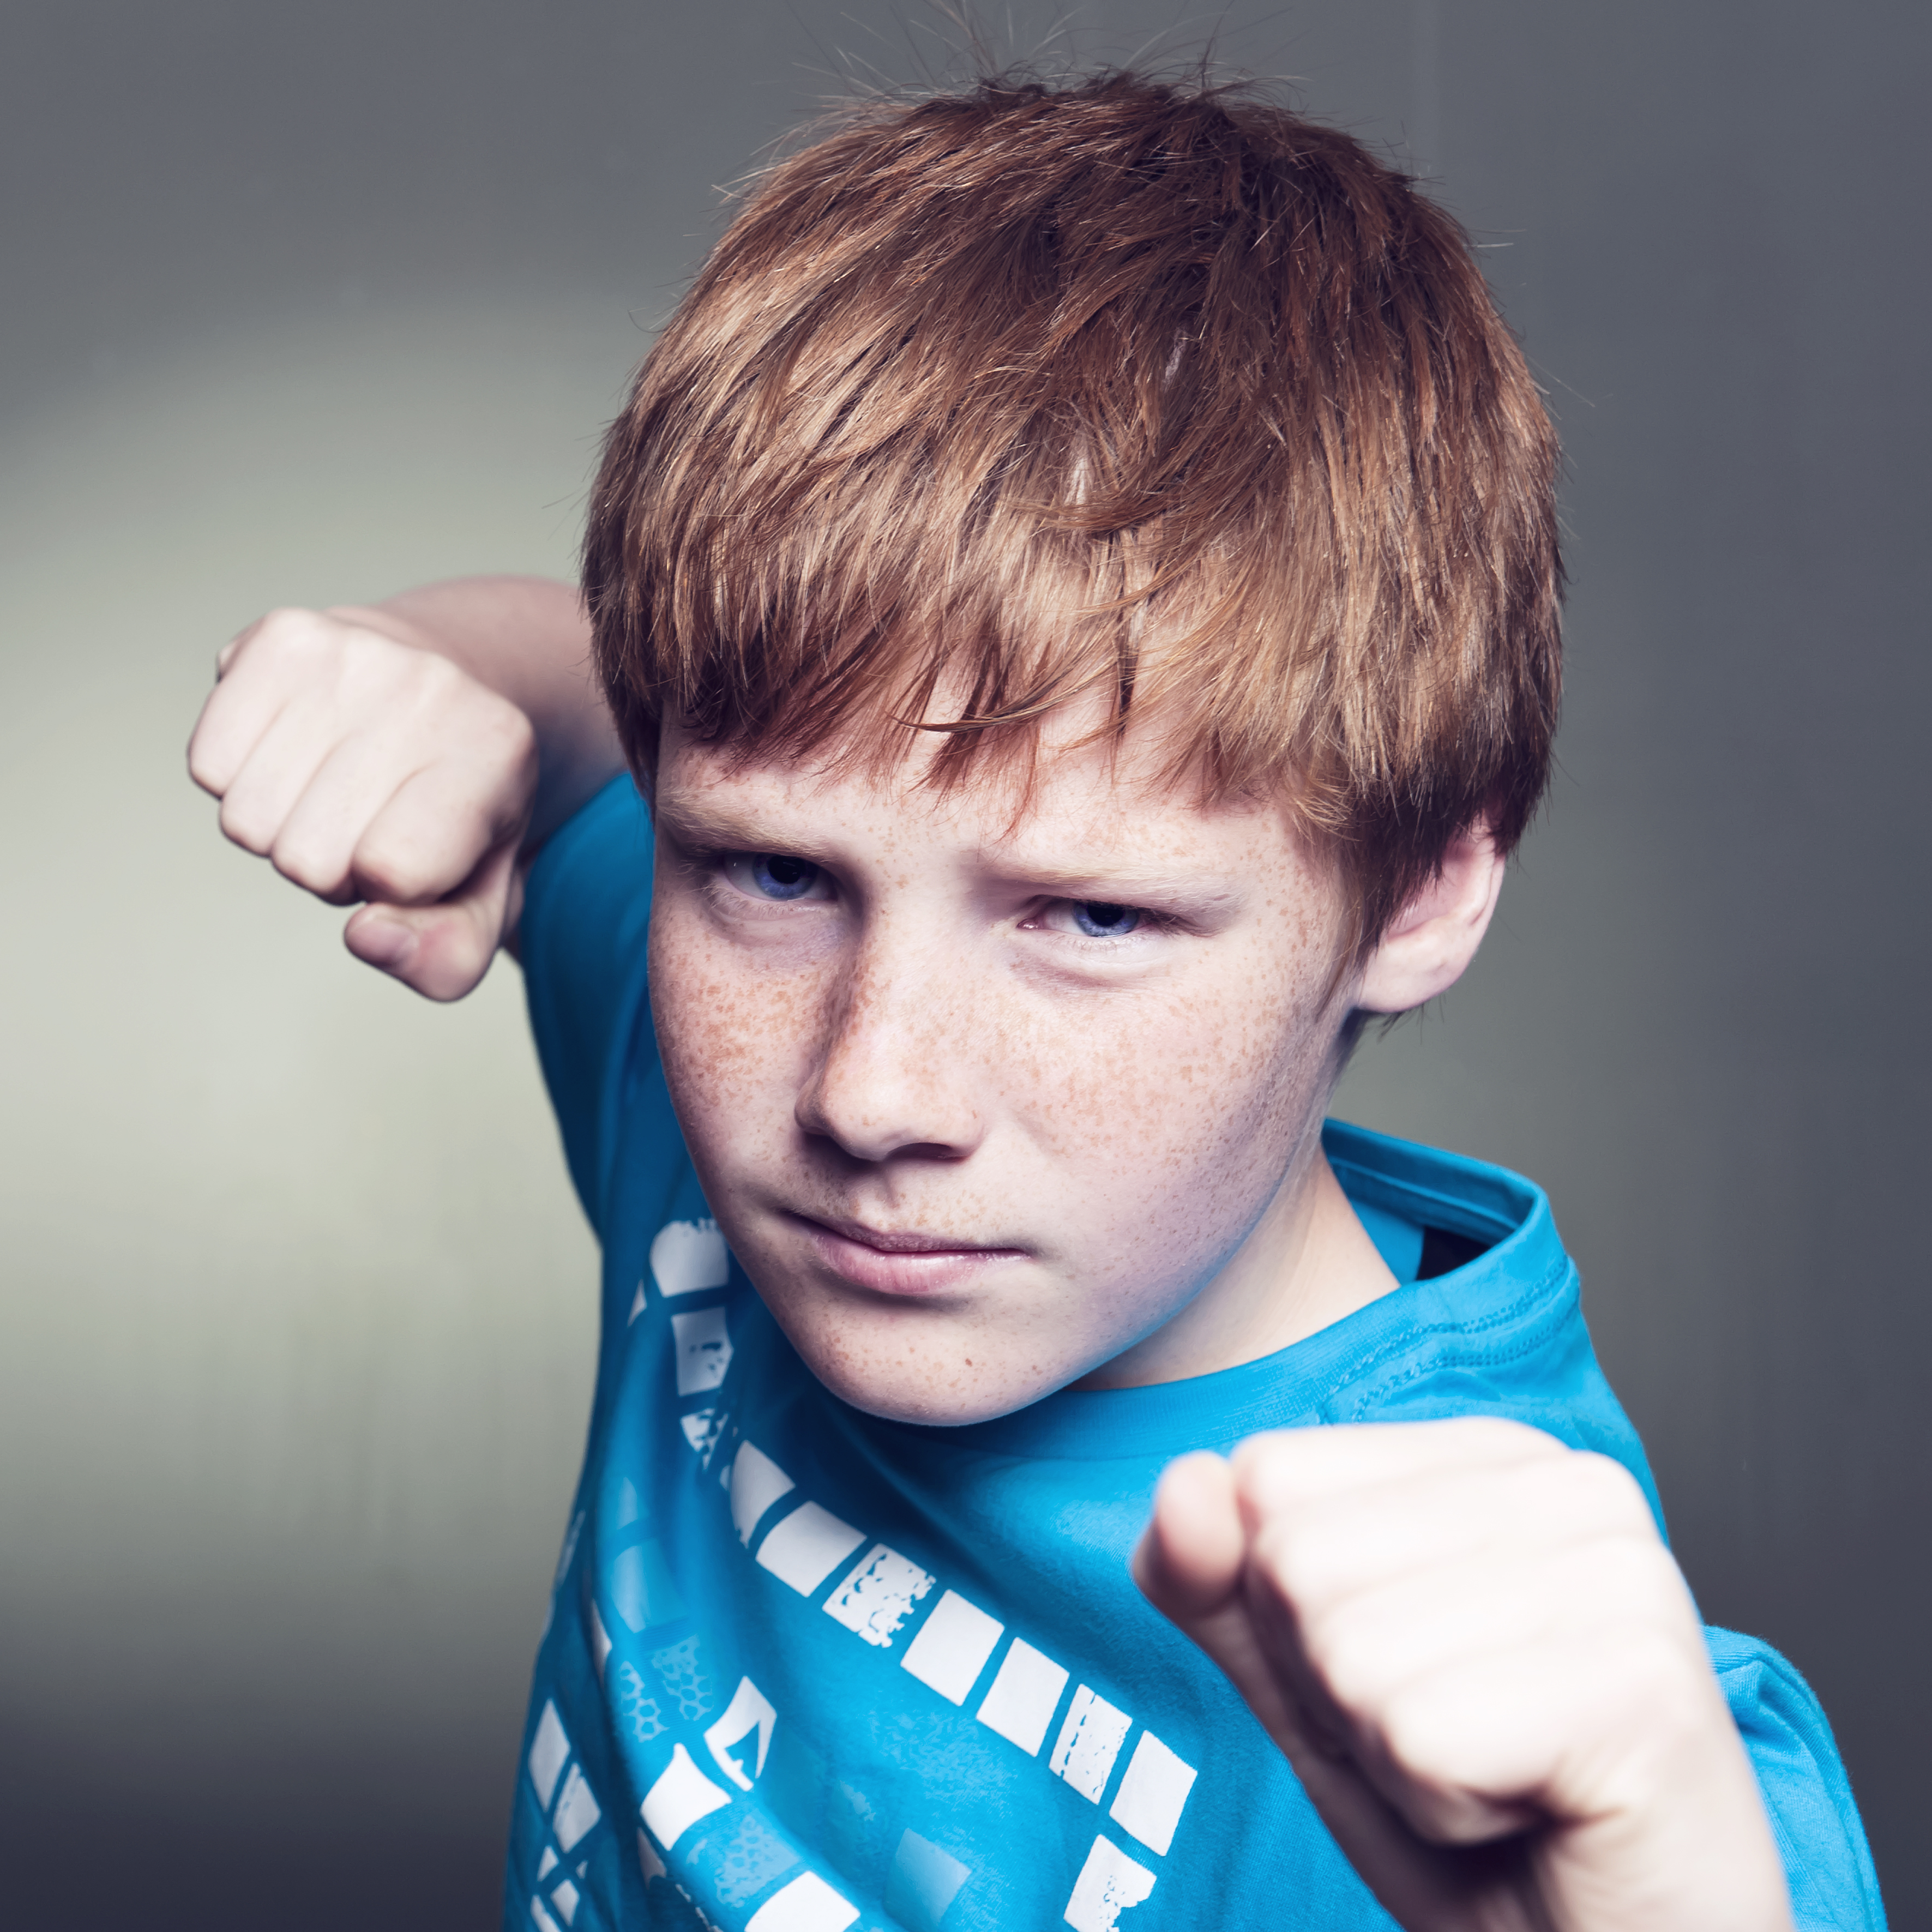 This boy is threatening physical aggression.^[[Image](https://www.flickr.com/photos/34547181@N00/5653340435/) by [Philippe Put](https://www.flickr.com/photos/34547181@N00/) is licensed under [CC BY 2.0](https://creativecommons.org/licenses/by/2.0/)]